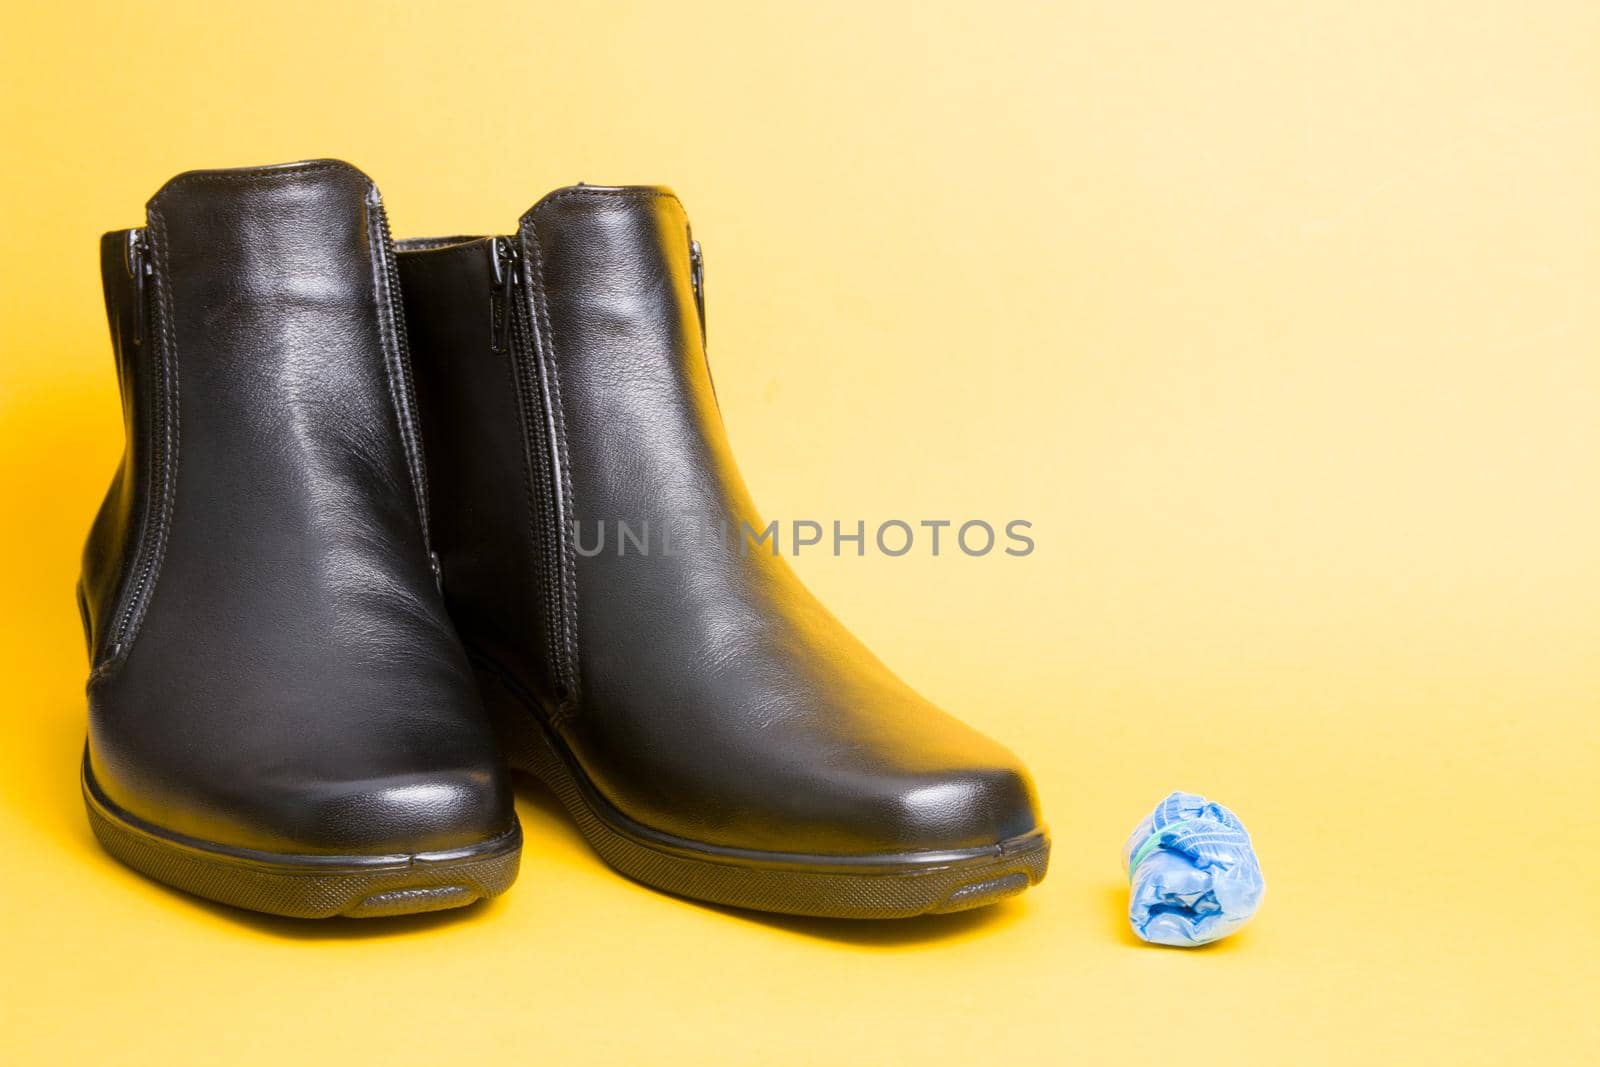 black leather boots and blue disposable shoe covers on a yellow background copy space